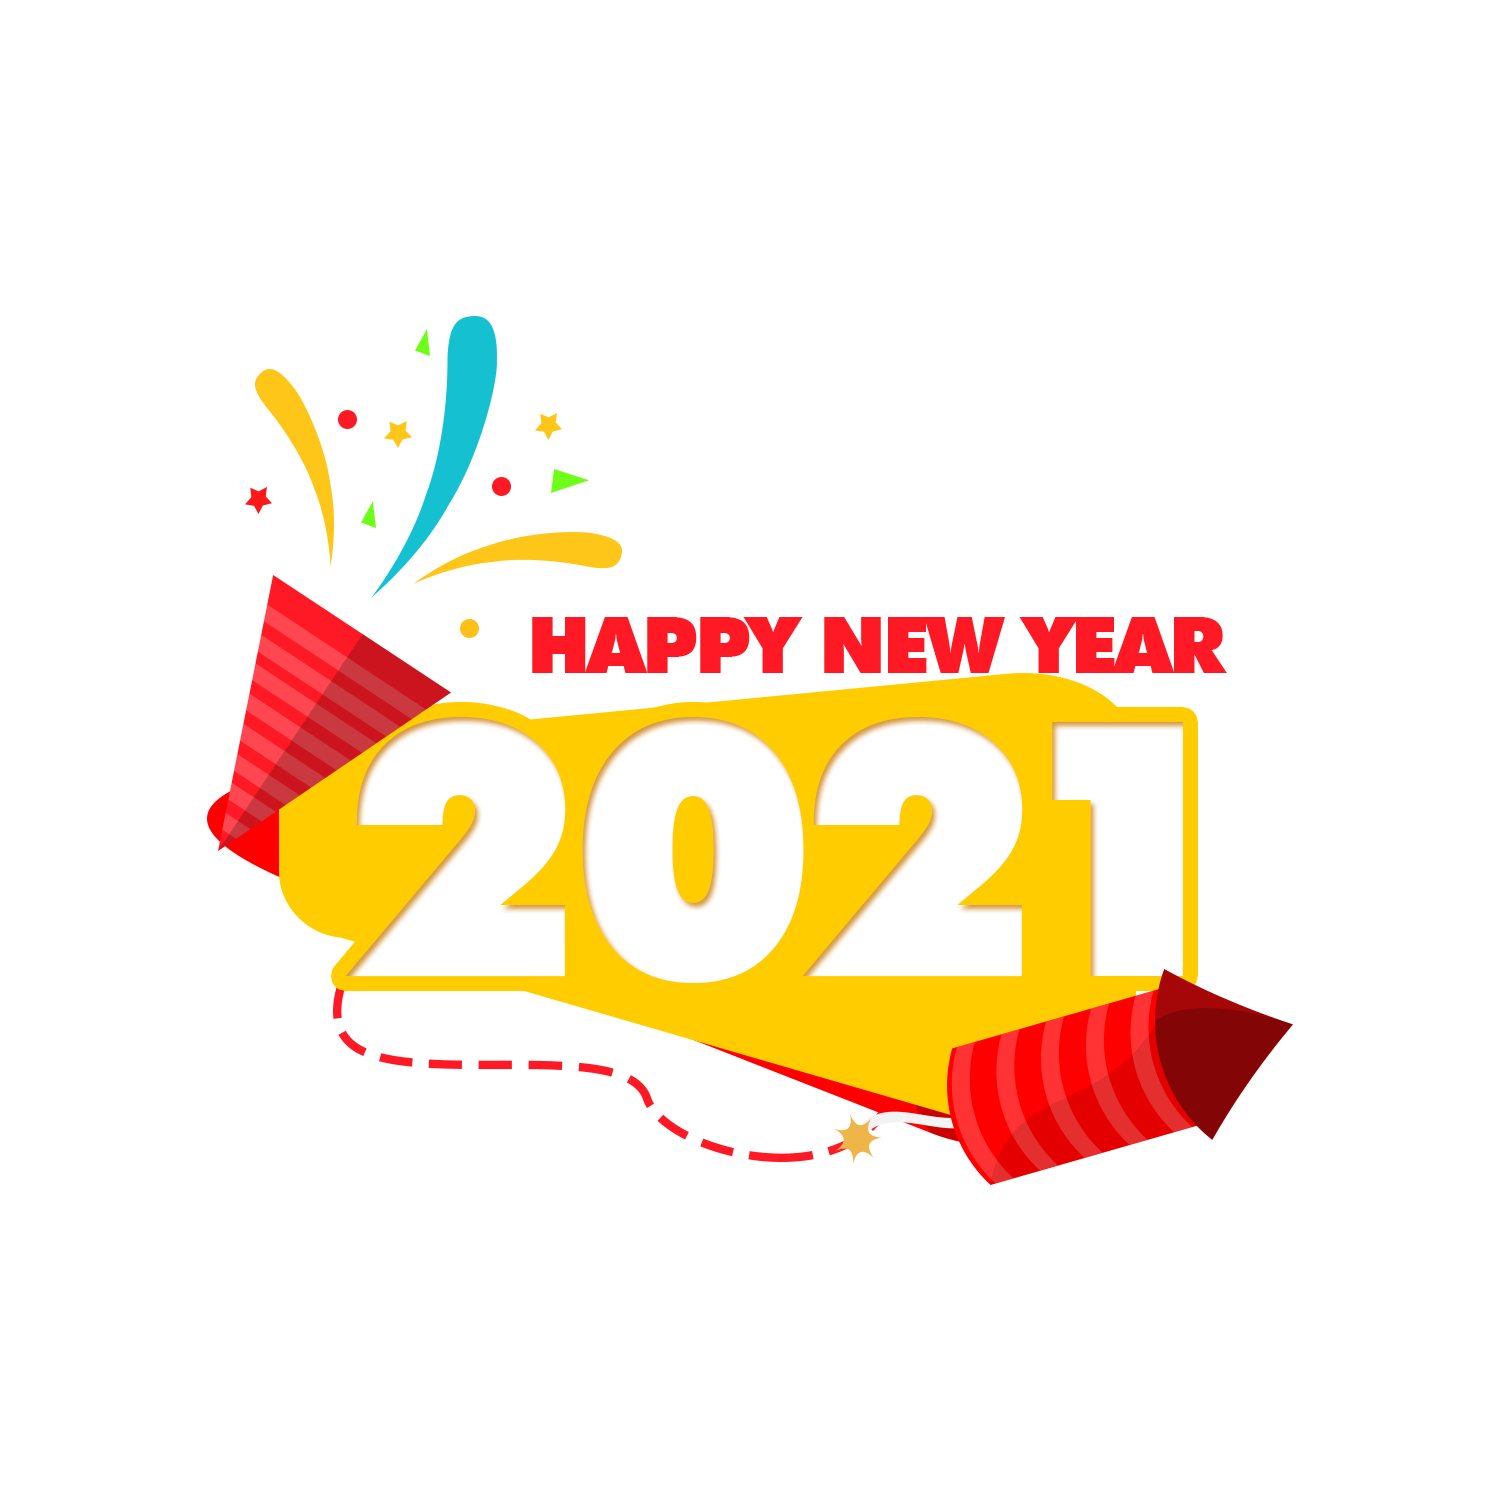 Pngtree—new-year-2021-flat-design_5673833.png